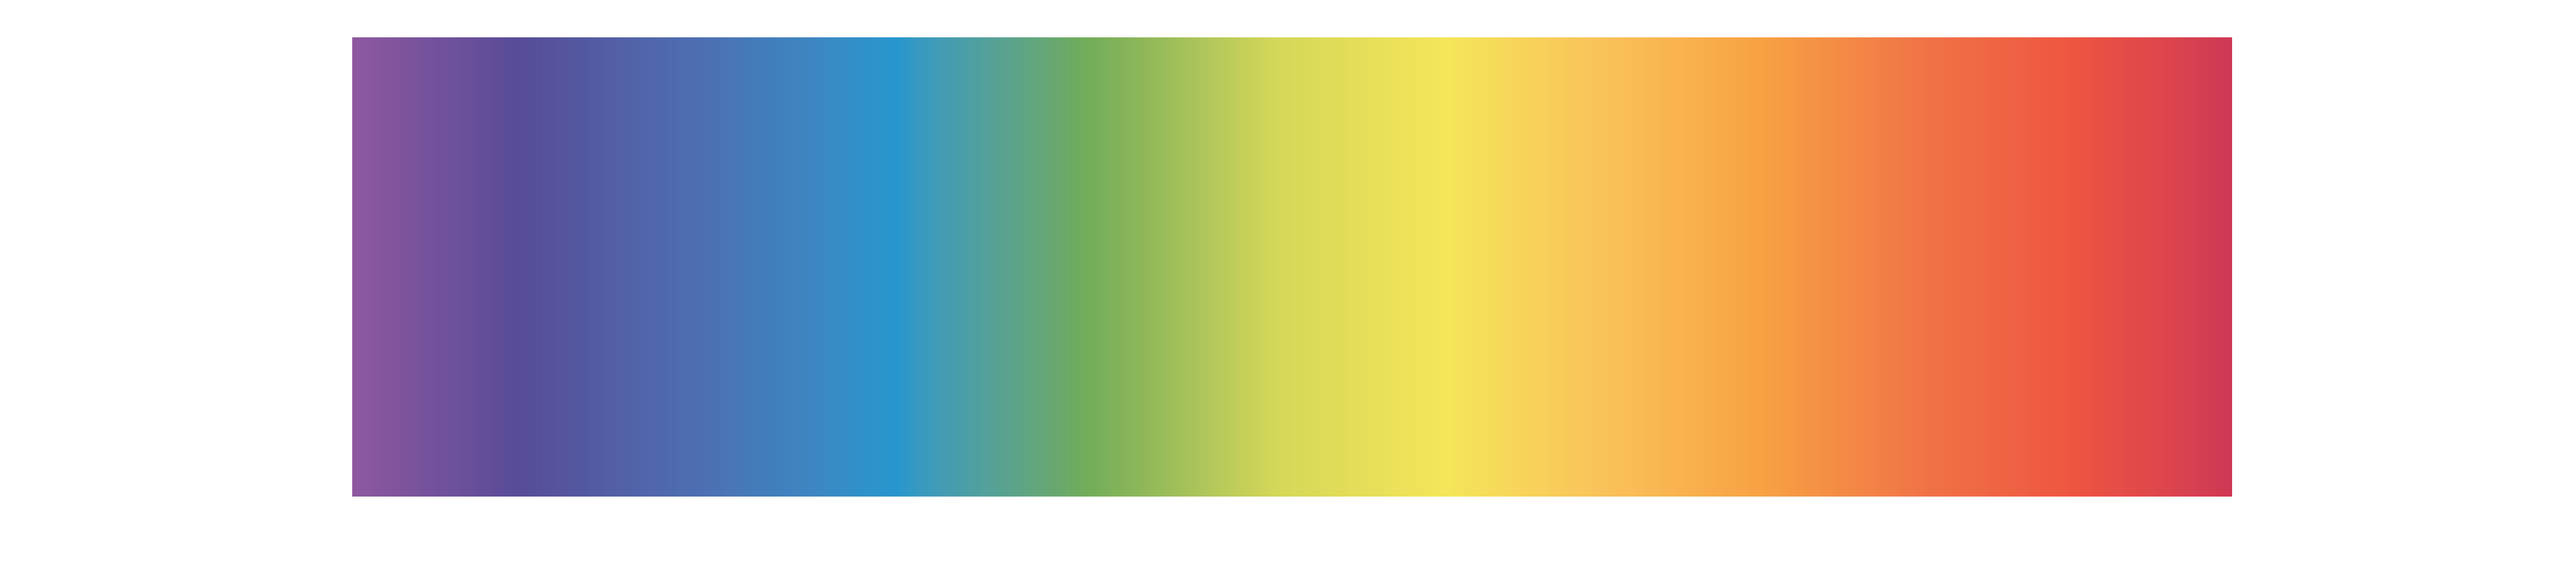 Spectrum of visible colours starting on the left with violet, violet-blue, blue, blue-green, green, green-yellow, yellow, yellow-red, and ending with red.